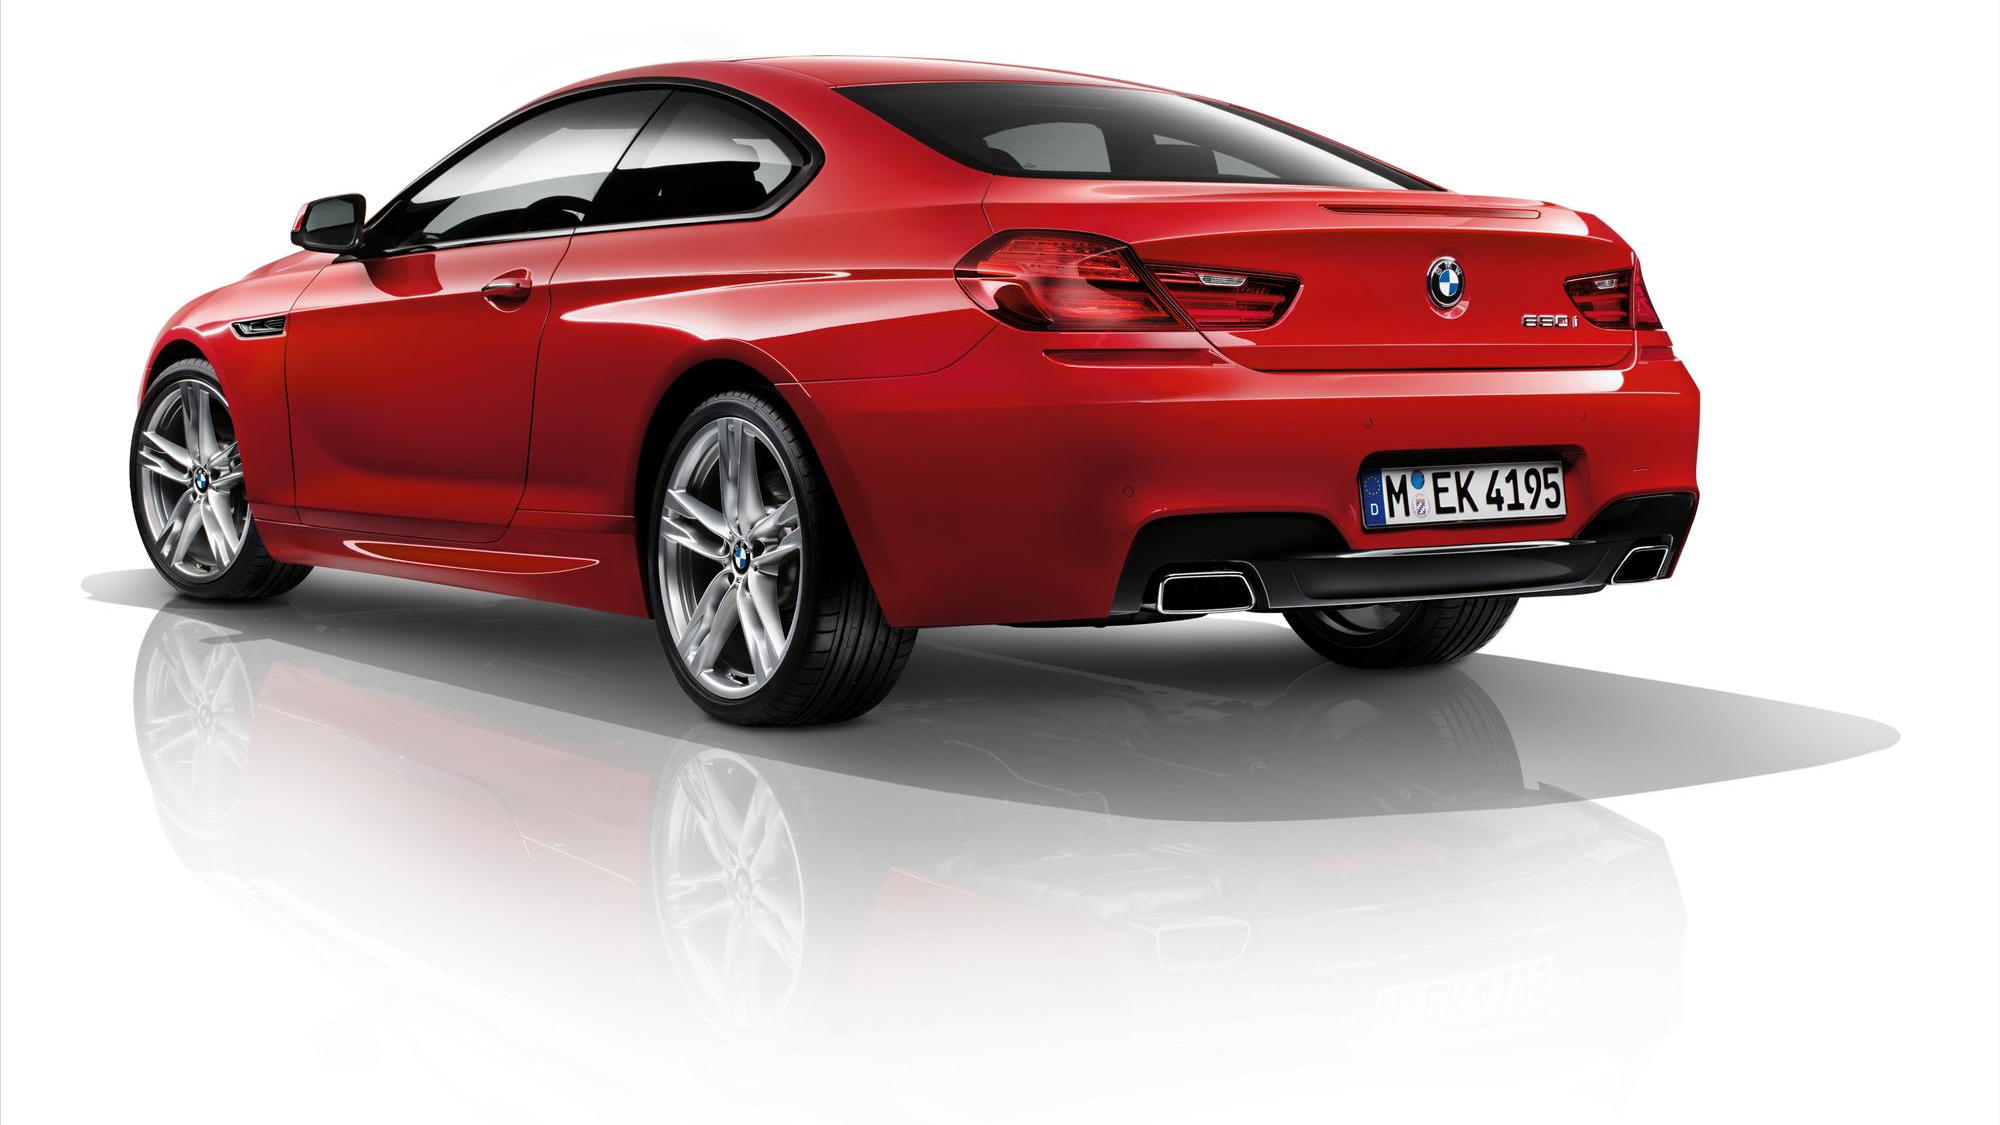 2012 BMW 6-Series Coupe with M Sport package